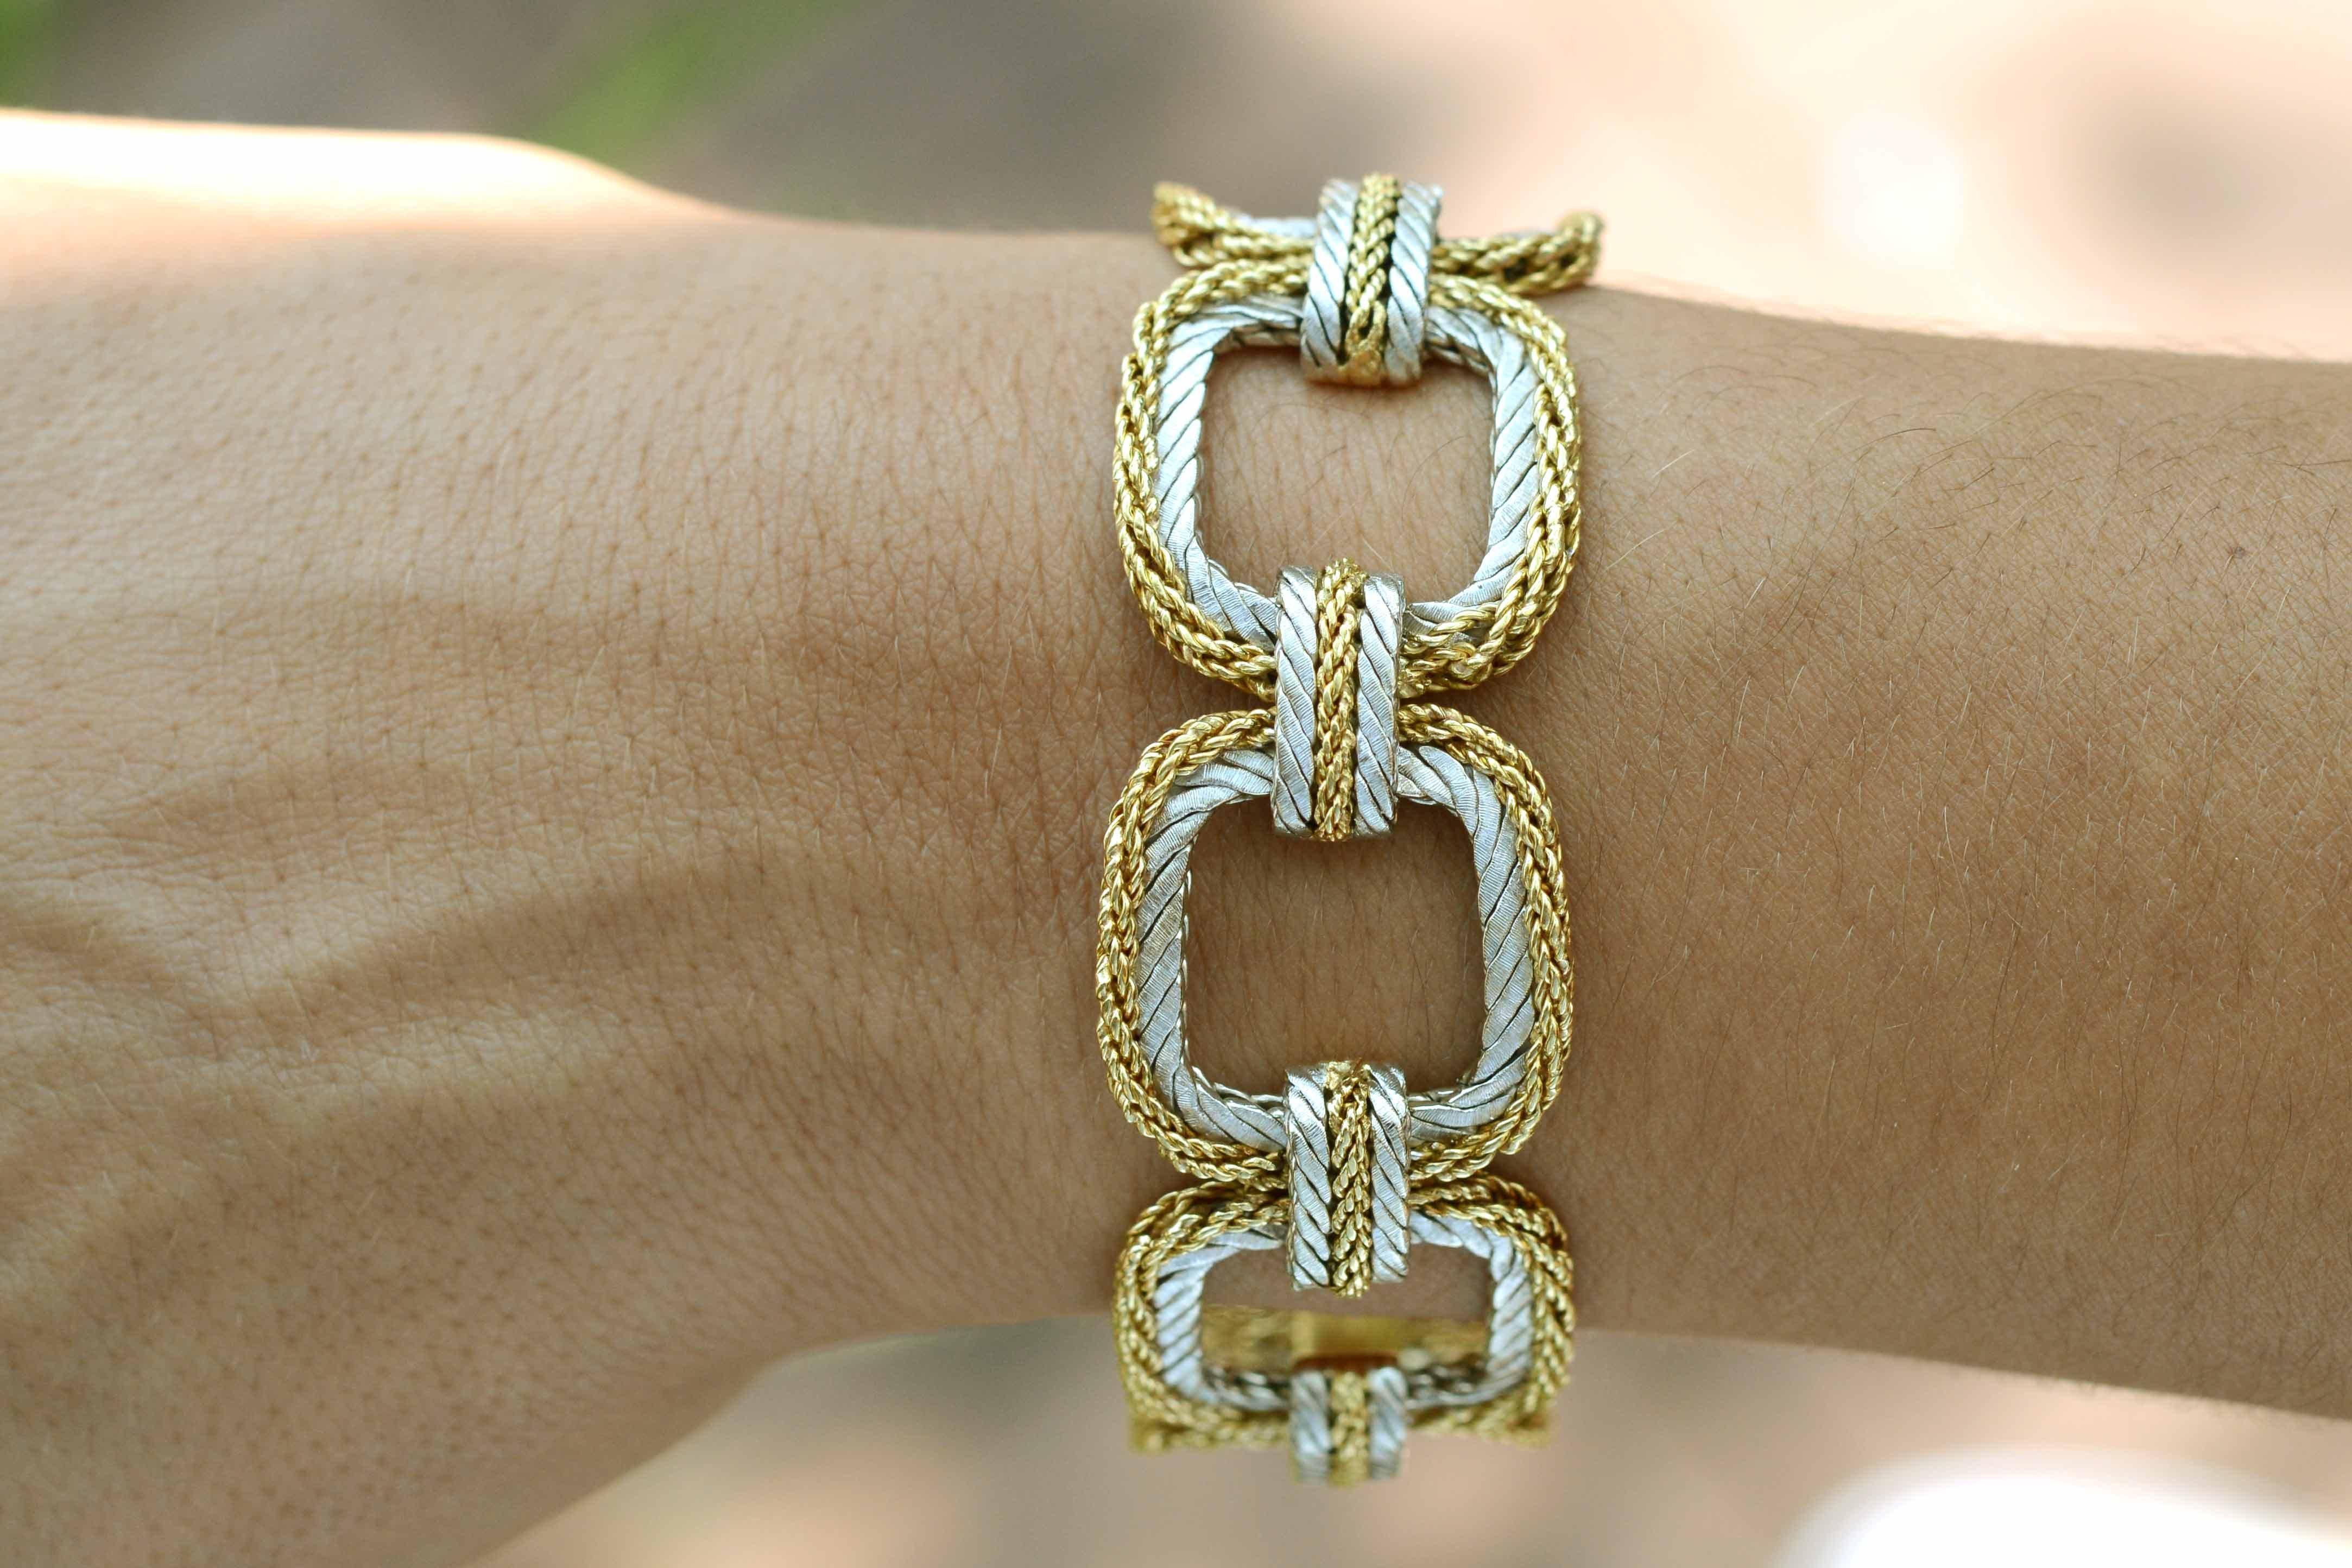 A bold, vintage Buccellati woven link bracelet crafted in 18kt yellow and white gold. This retired, intricate and textured design rendered in square links by the famous designer house in a hard to find 8